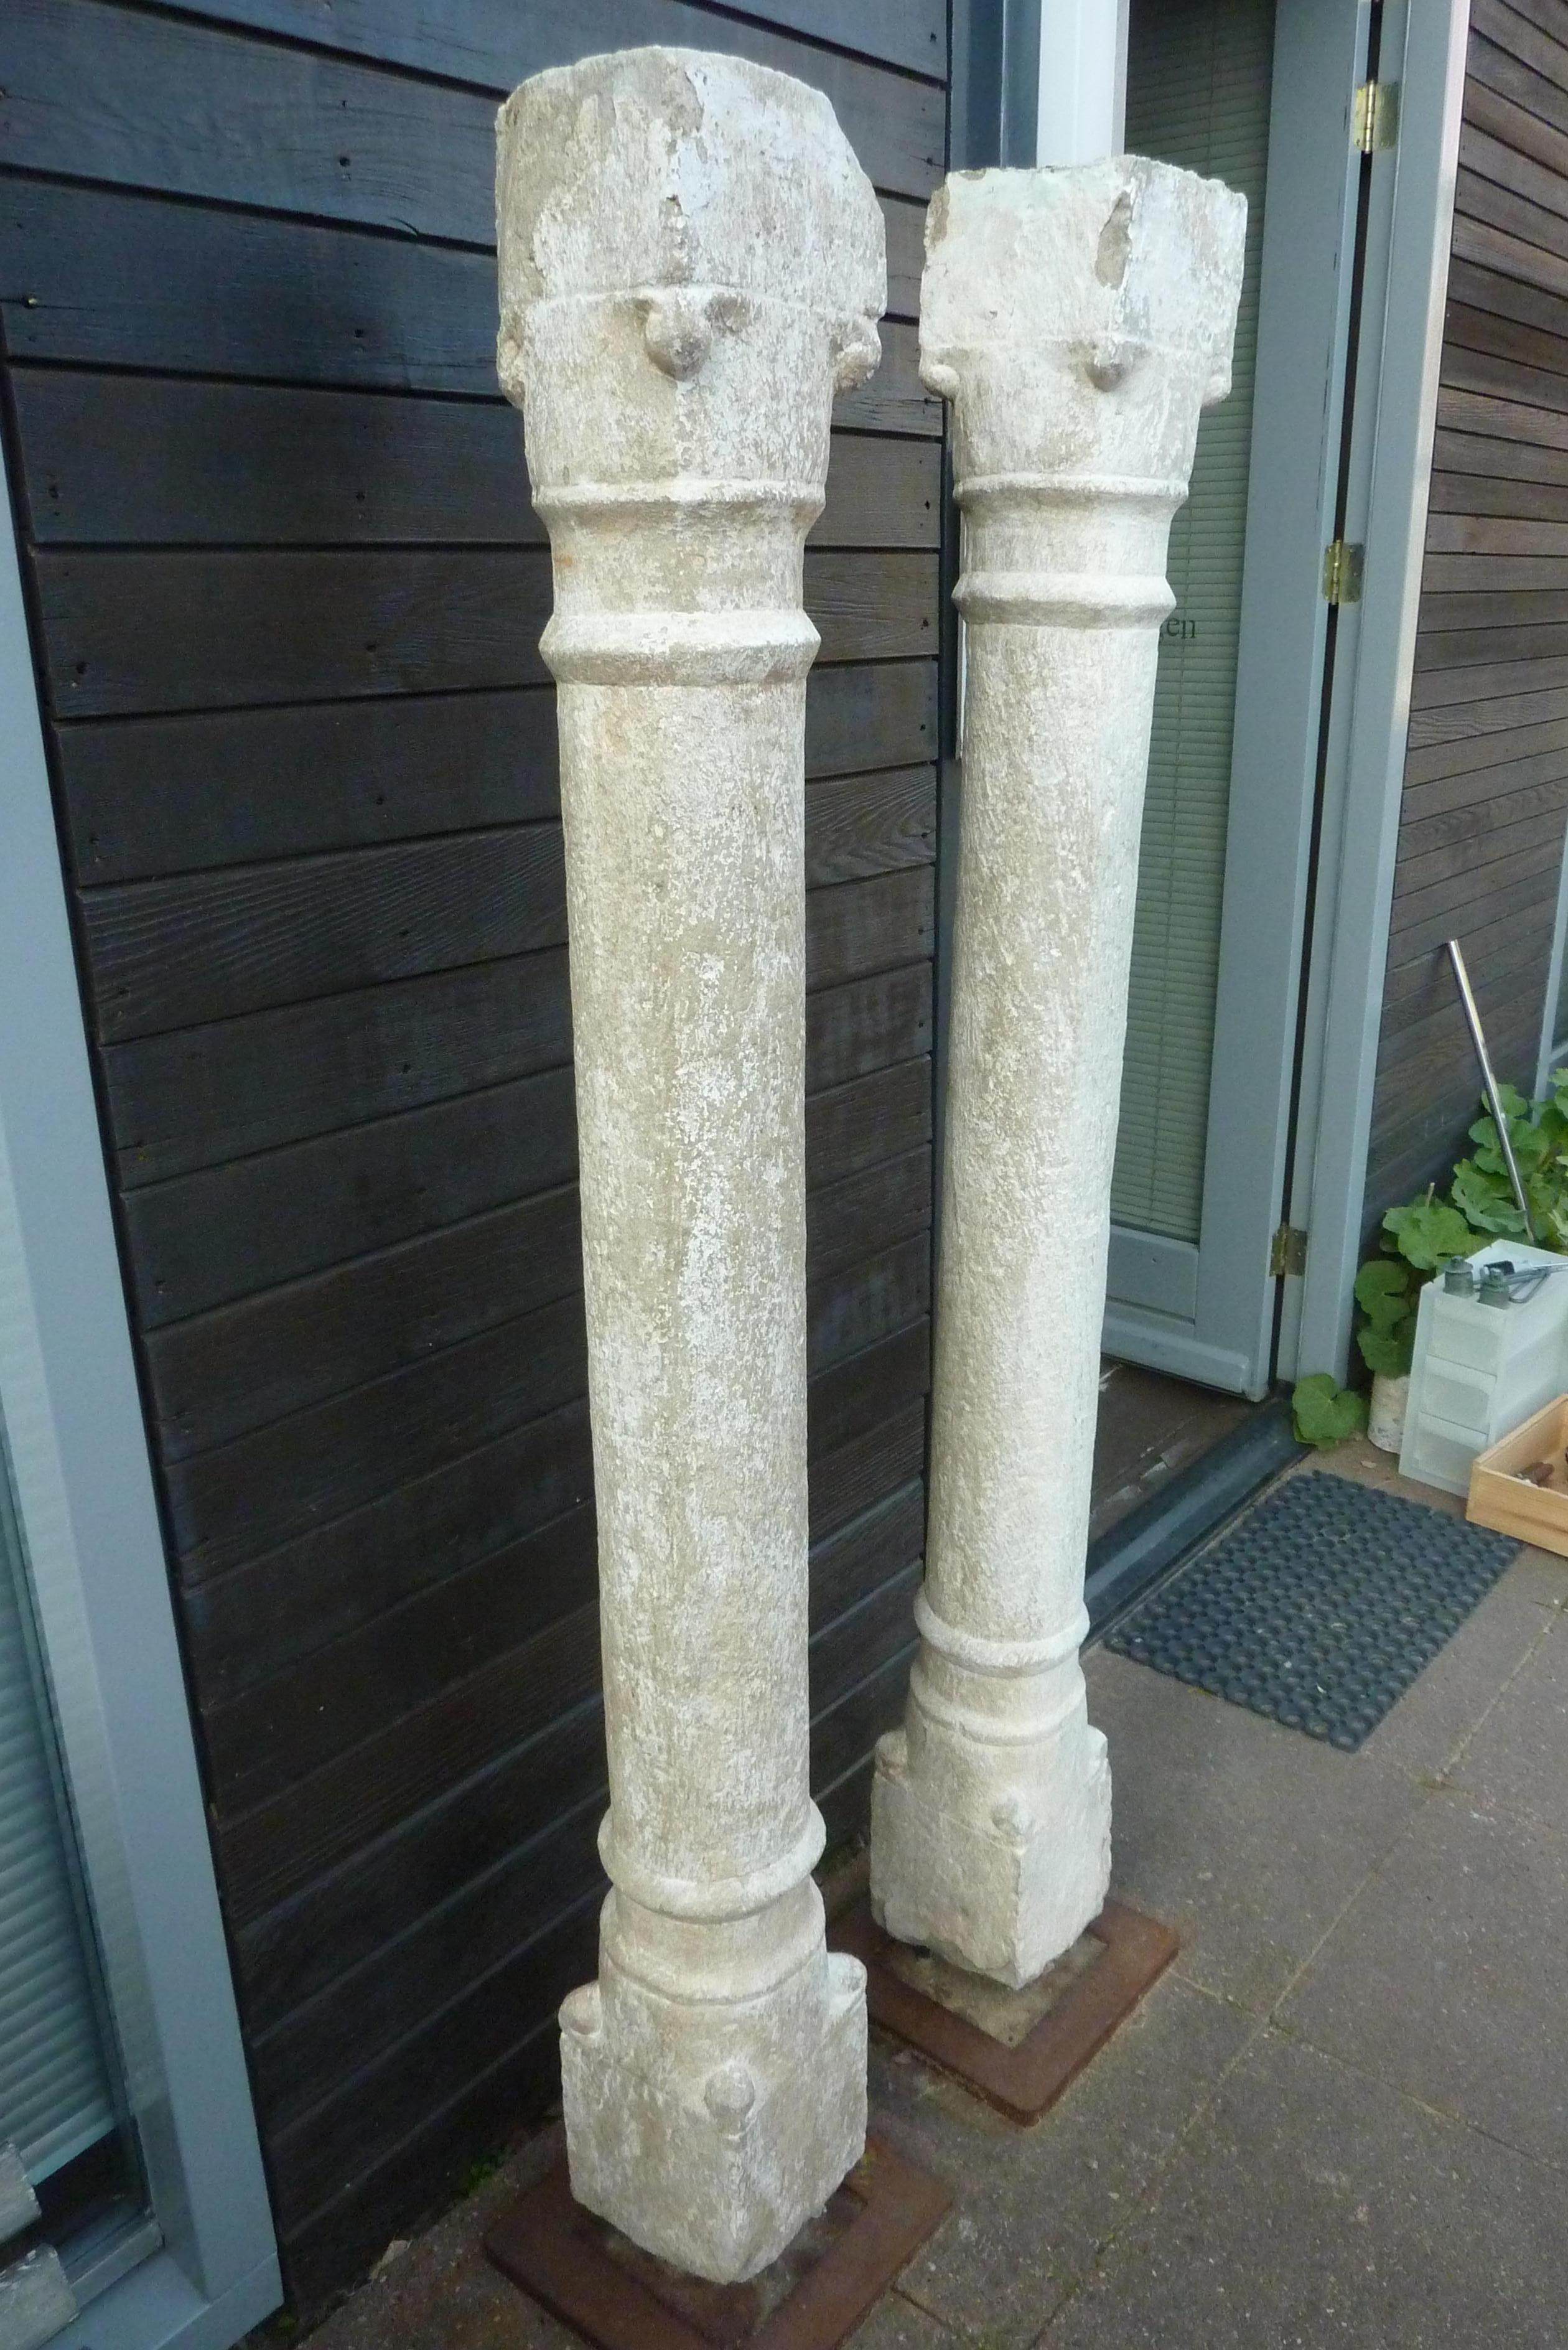 A Pair of Granite Pillars on Stabile Weathering Steel Stands
A pair of pillars origin India, 18-19th century.
They are made out of a very hard stone so we suspect it is more a granite sort.
We are not sure about the age we suspect they are from 18th